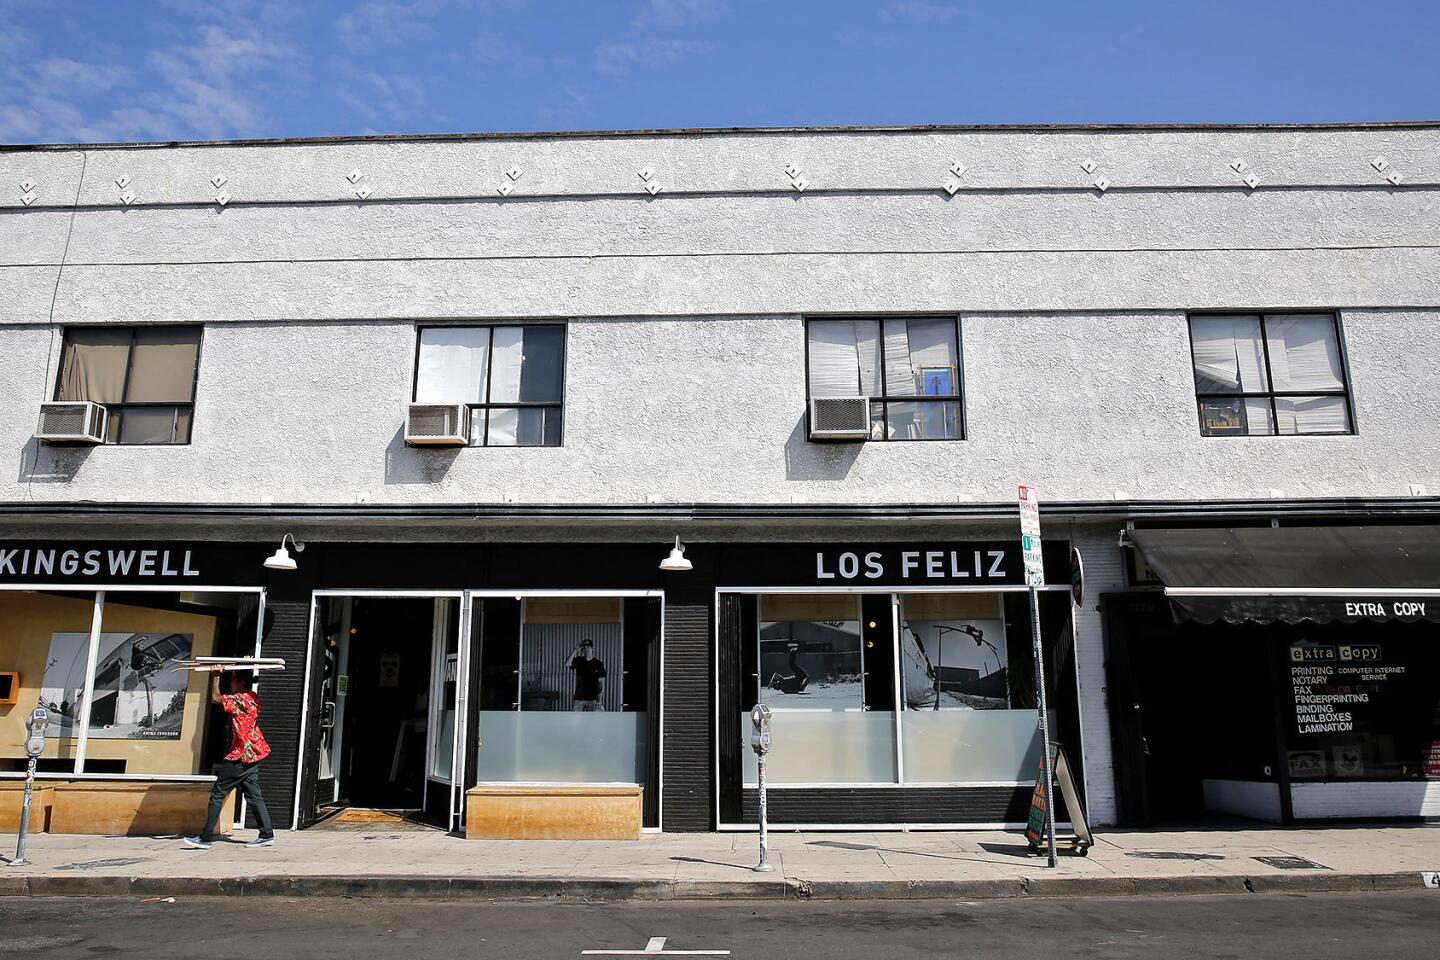 You can get tattoos and photo copies in the Los Feliz building